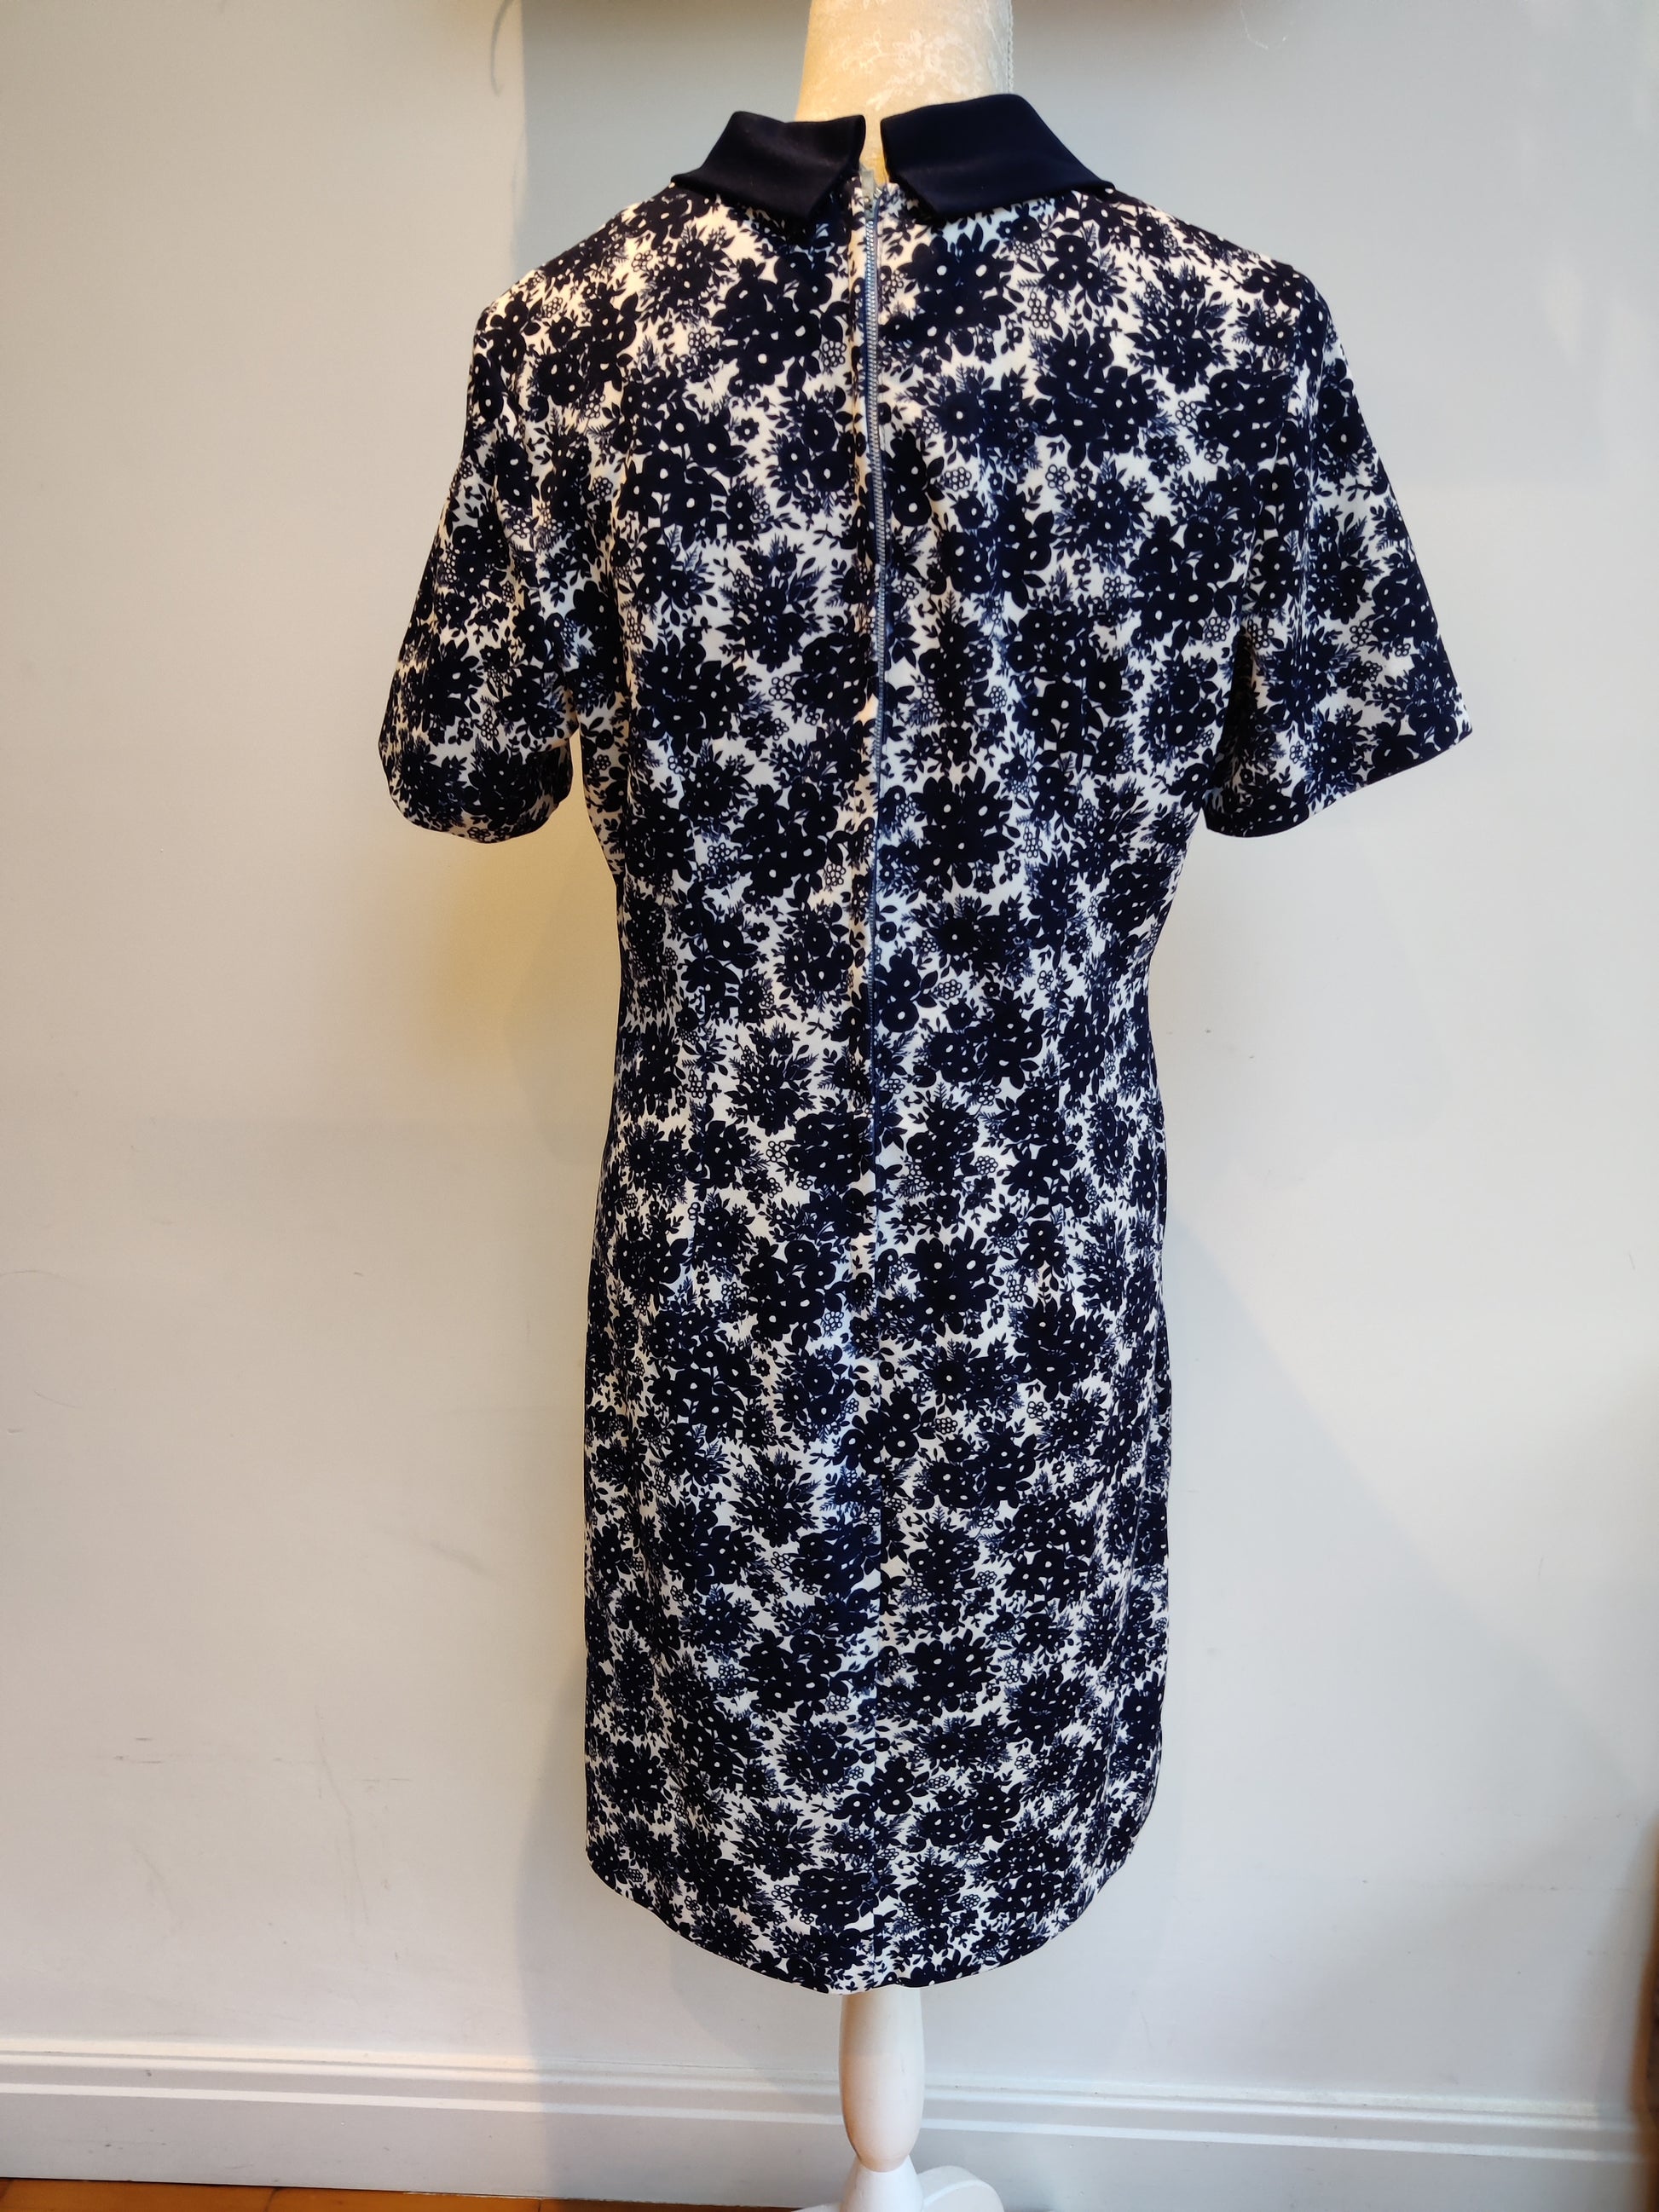 Blue and white modette dress size 14.